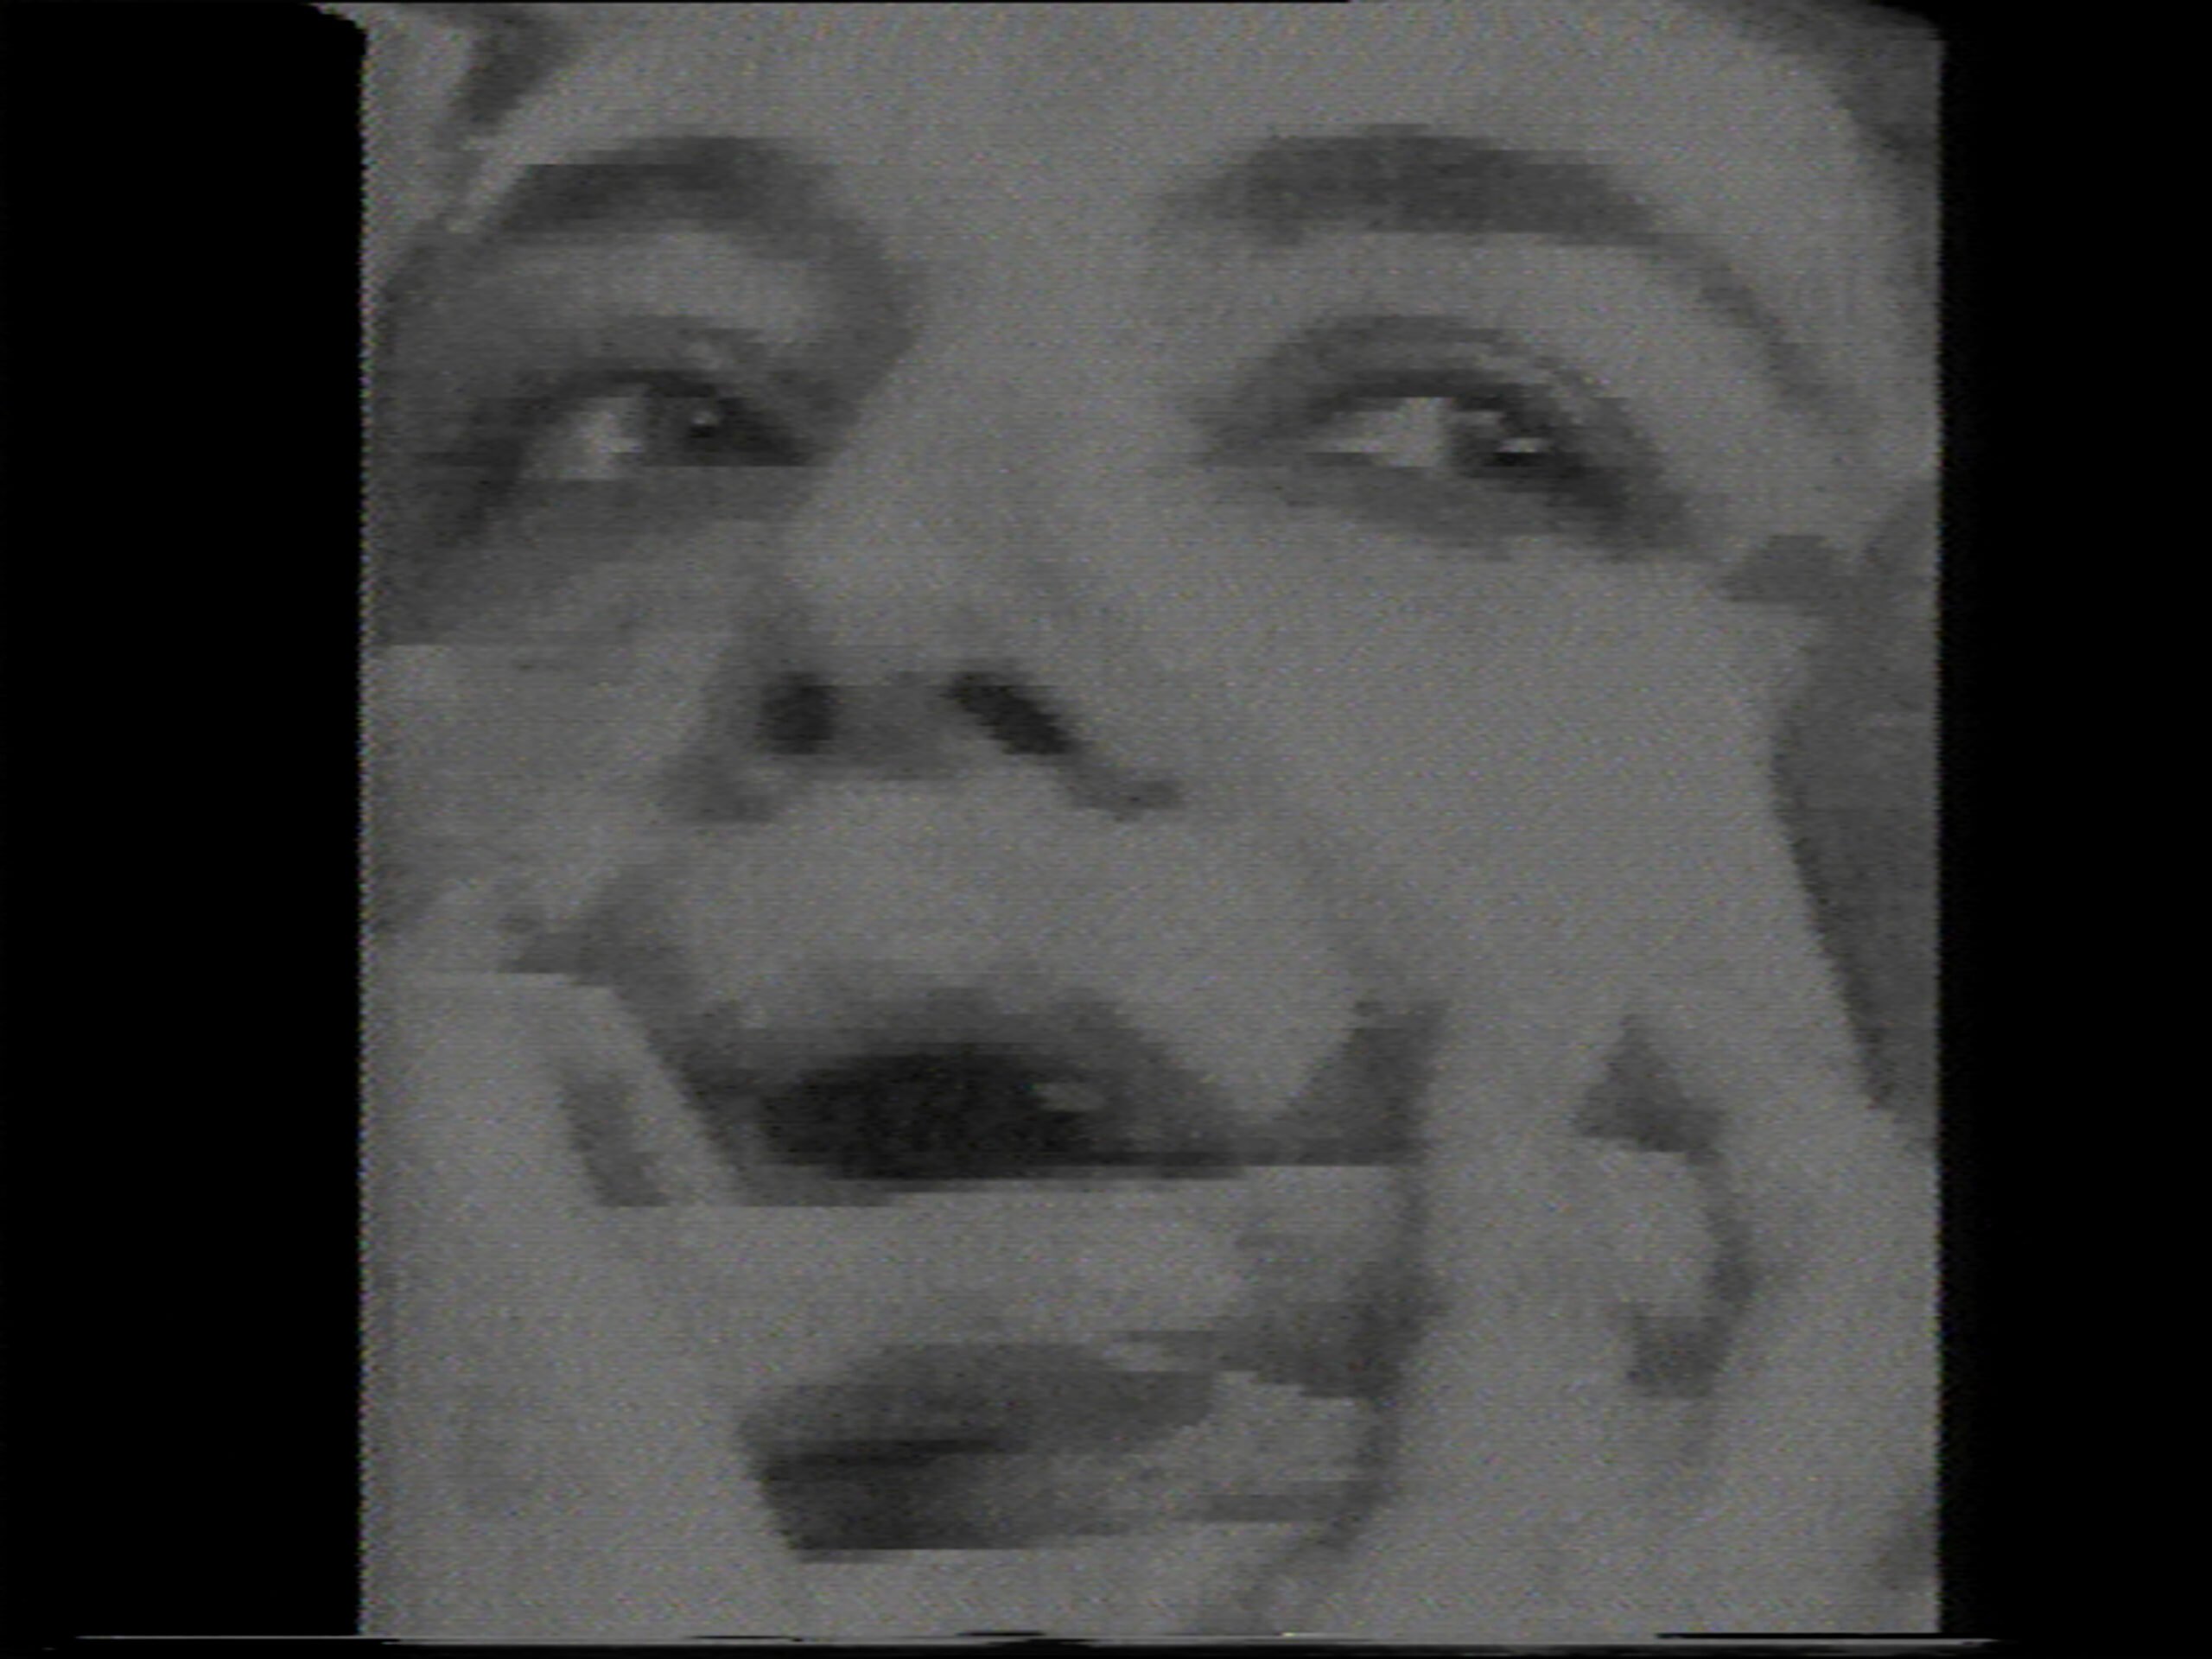 Still from Mona Hatoum’s So much I want to say. A low res black and white close up of a face whose mouth is covered by a hand, gagging. 